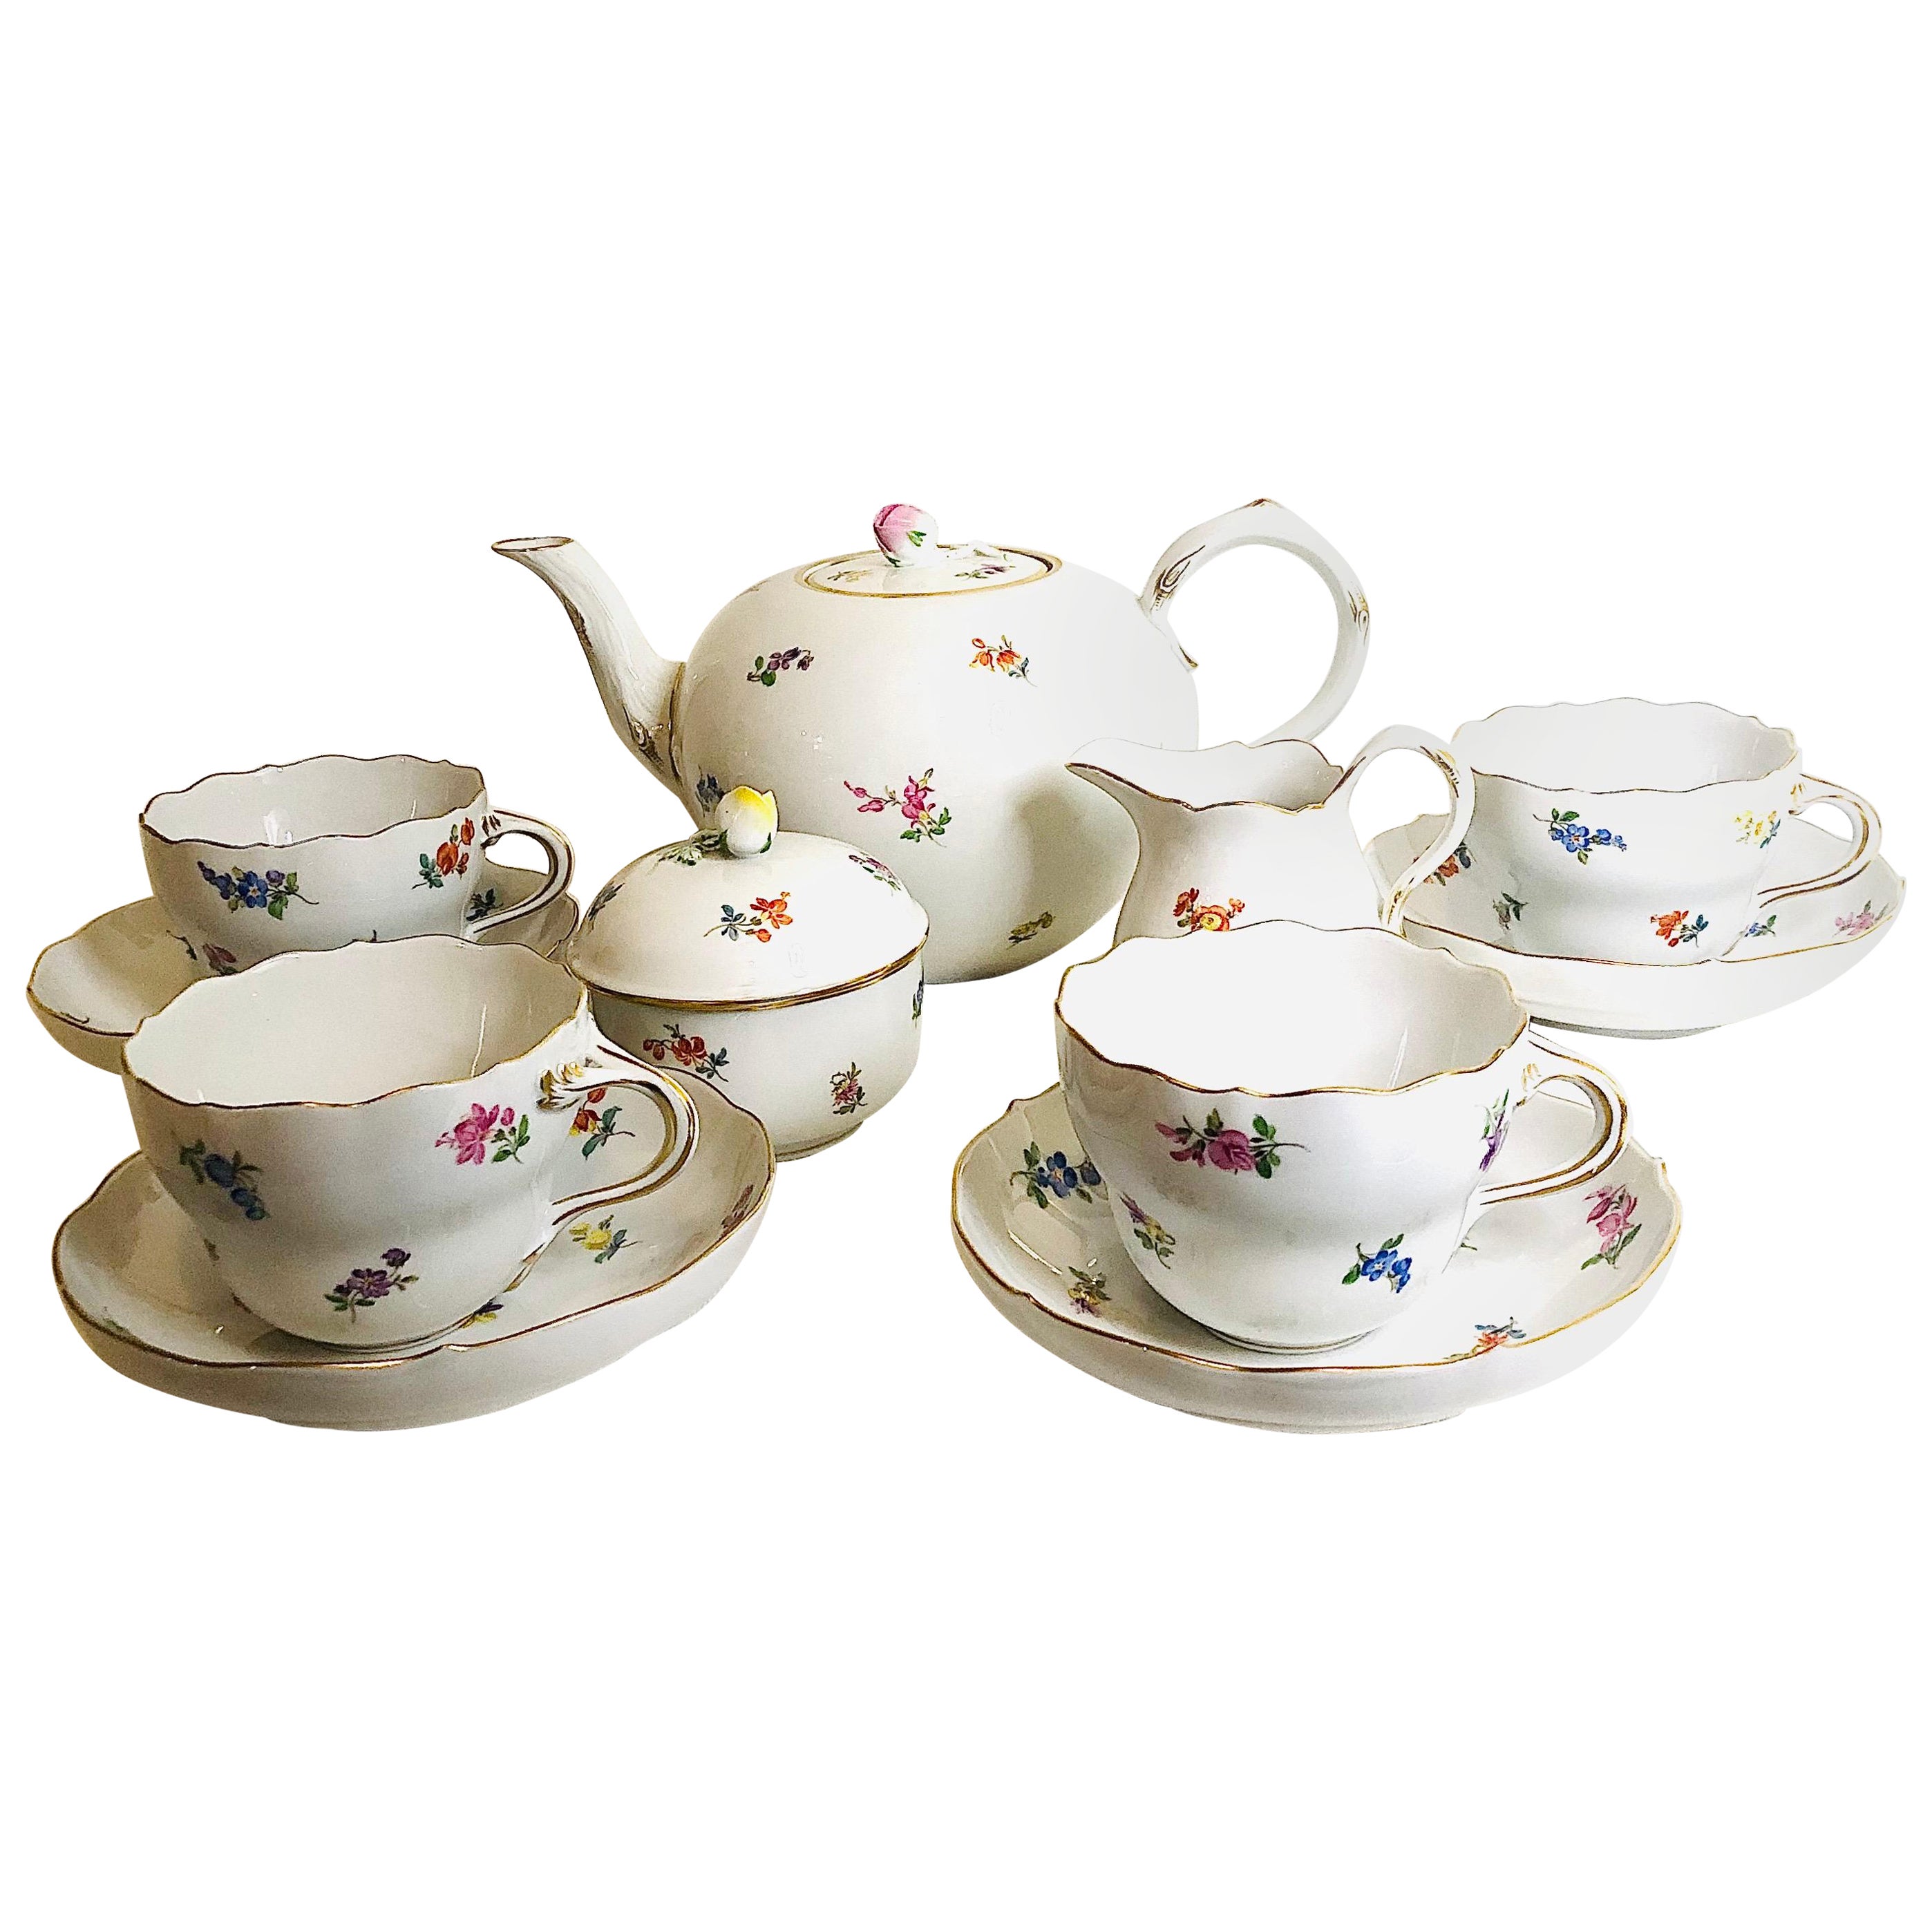 Meissen Streublumen Tea Set with 4 Cups and Saucers and Covered Sugar & Creamer